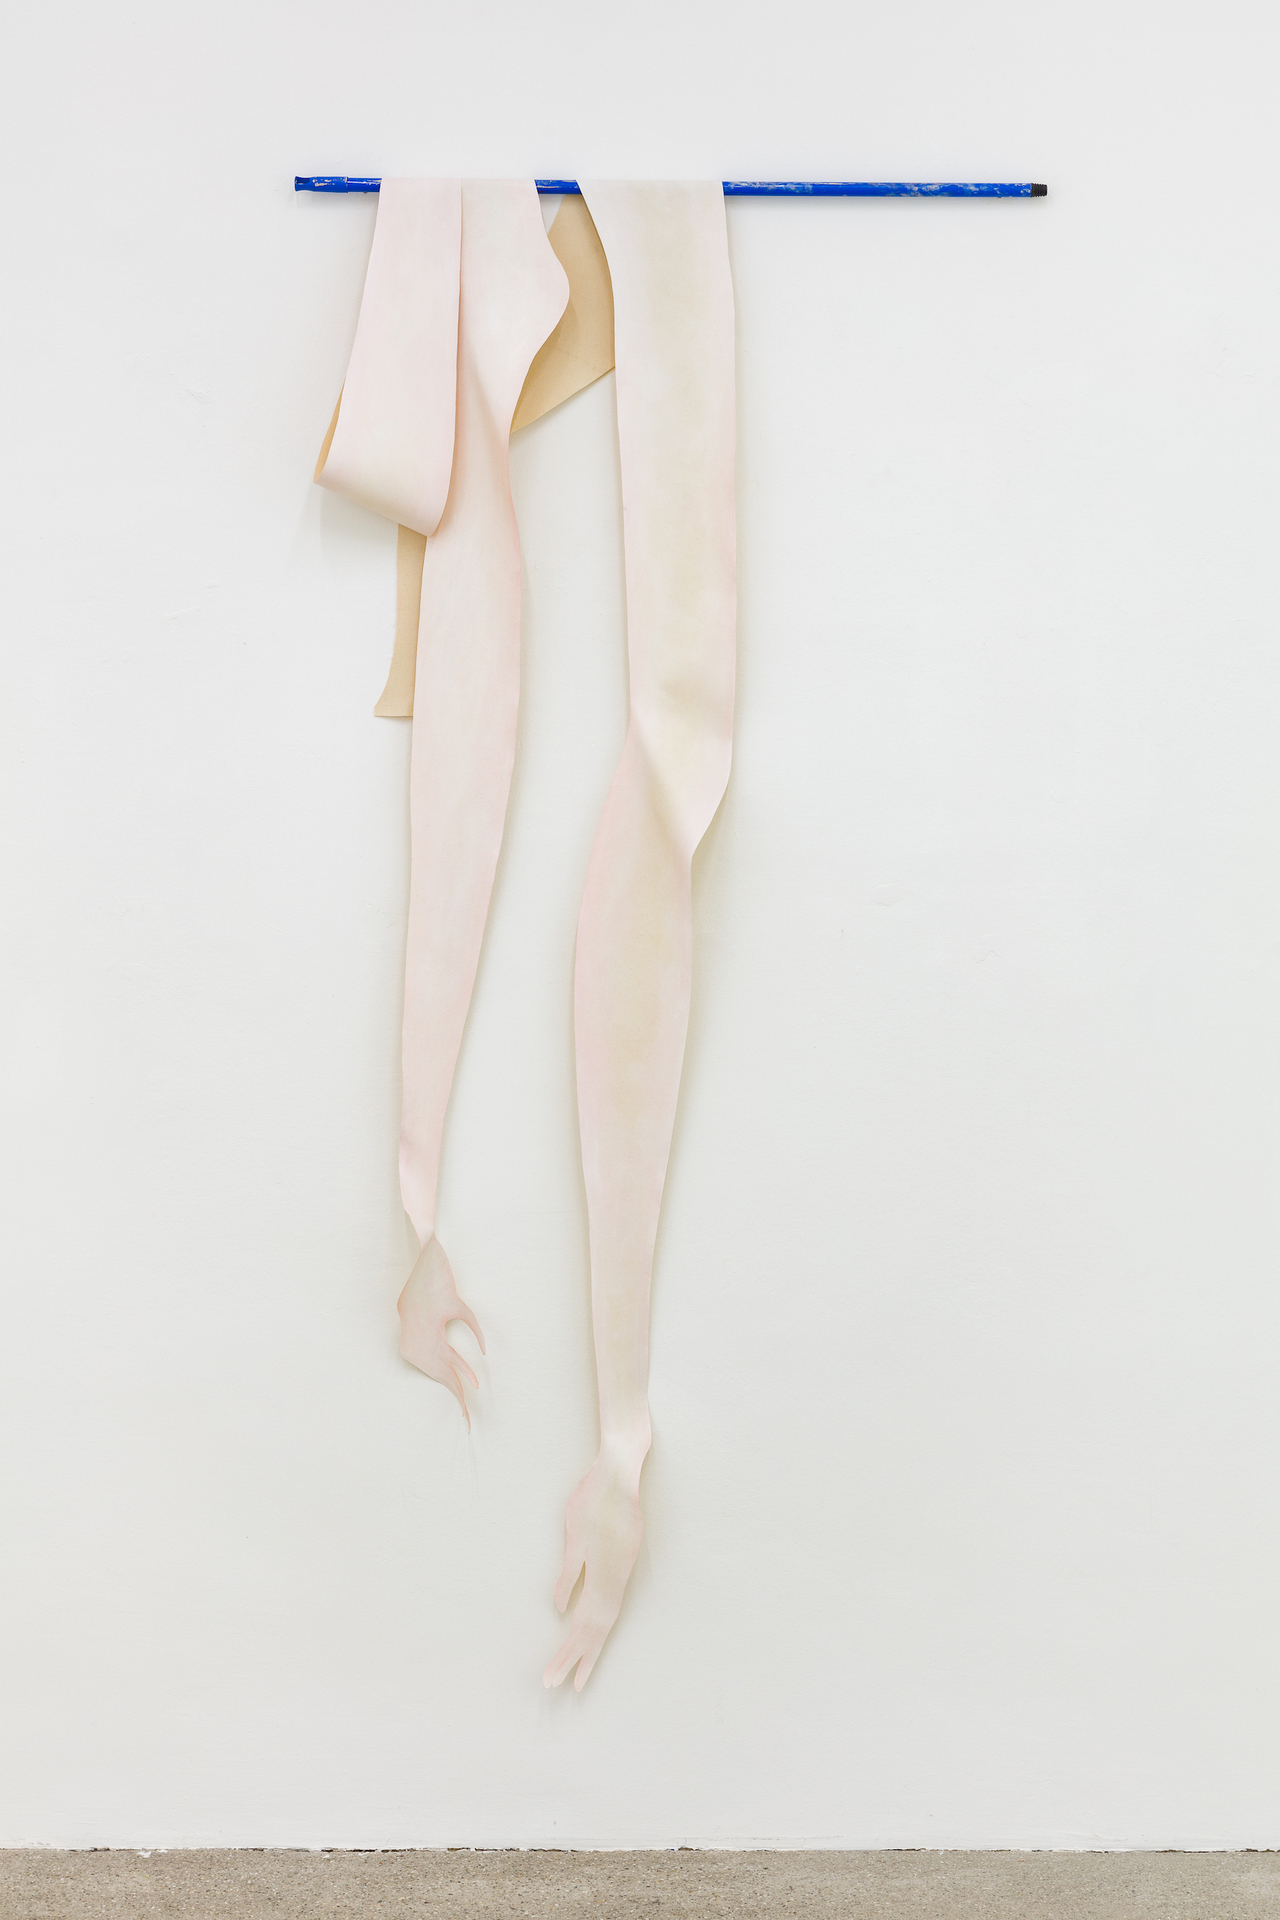 Sarah Bechter, Untitled, 2020, oil on canvas, dimensions variable